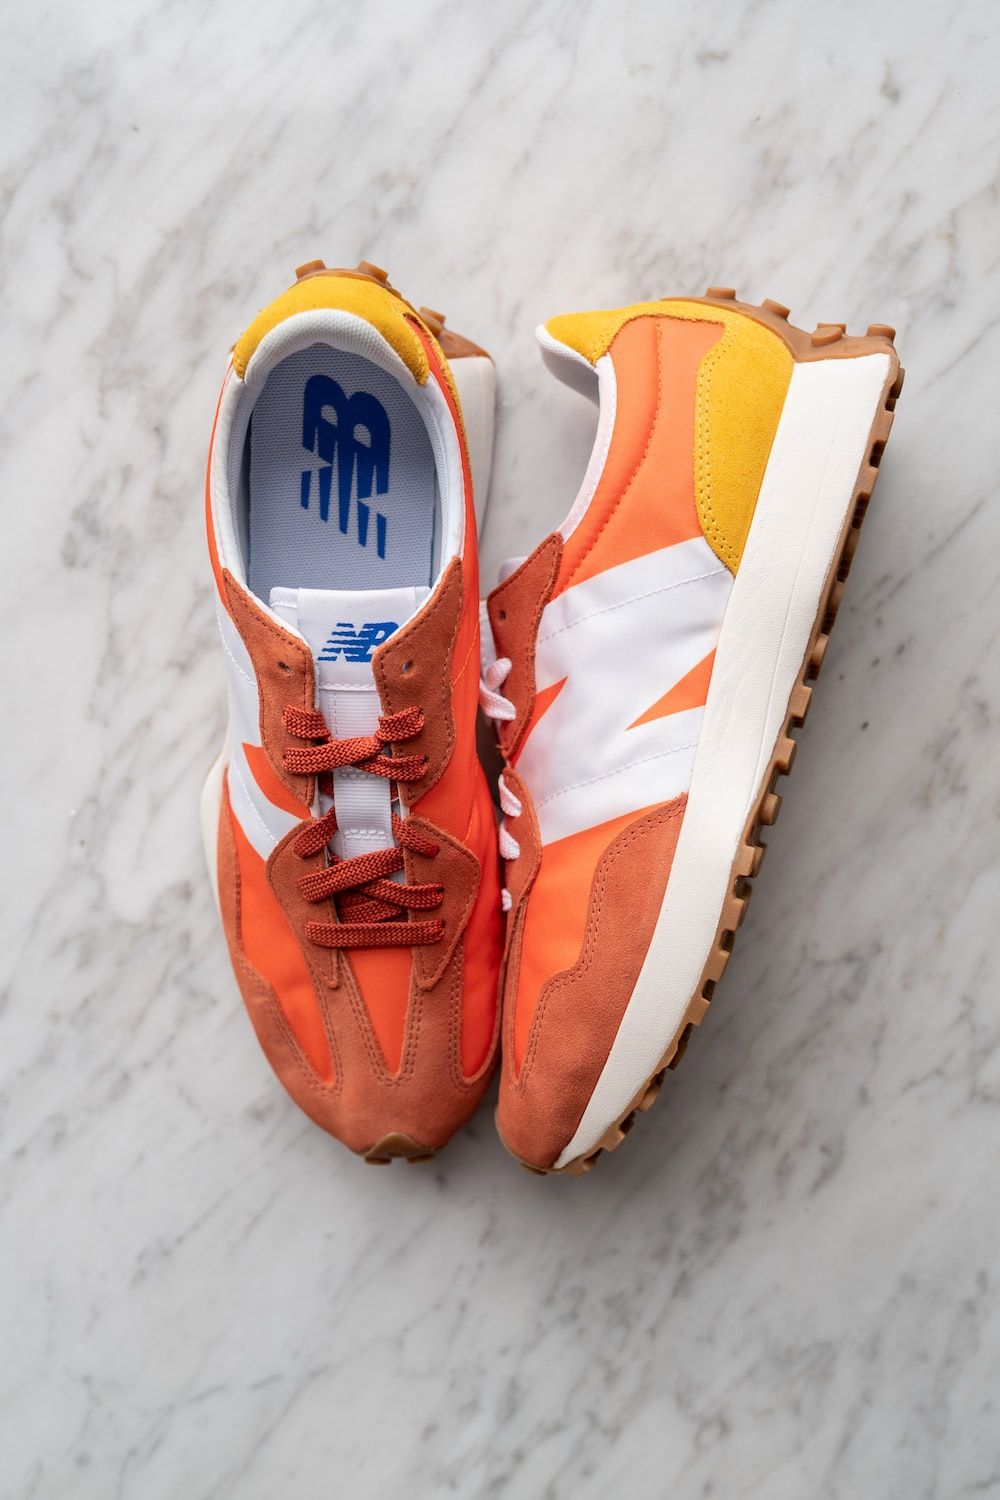 An orange and white New Balance sneakers on a marble surface - New Balance